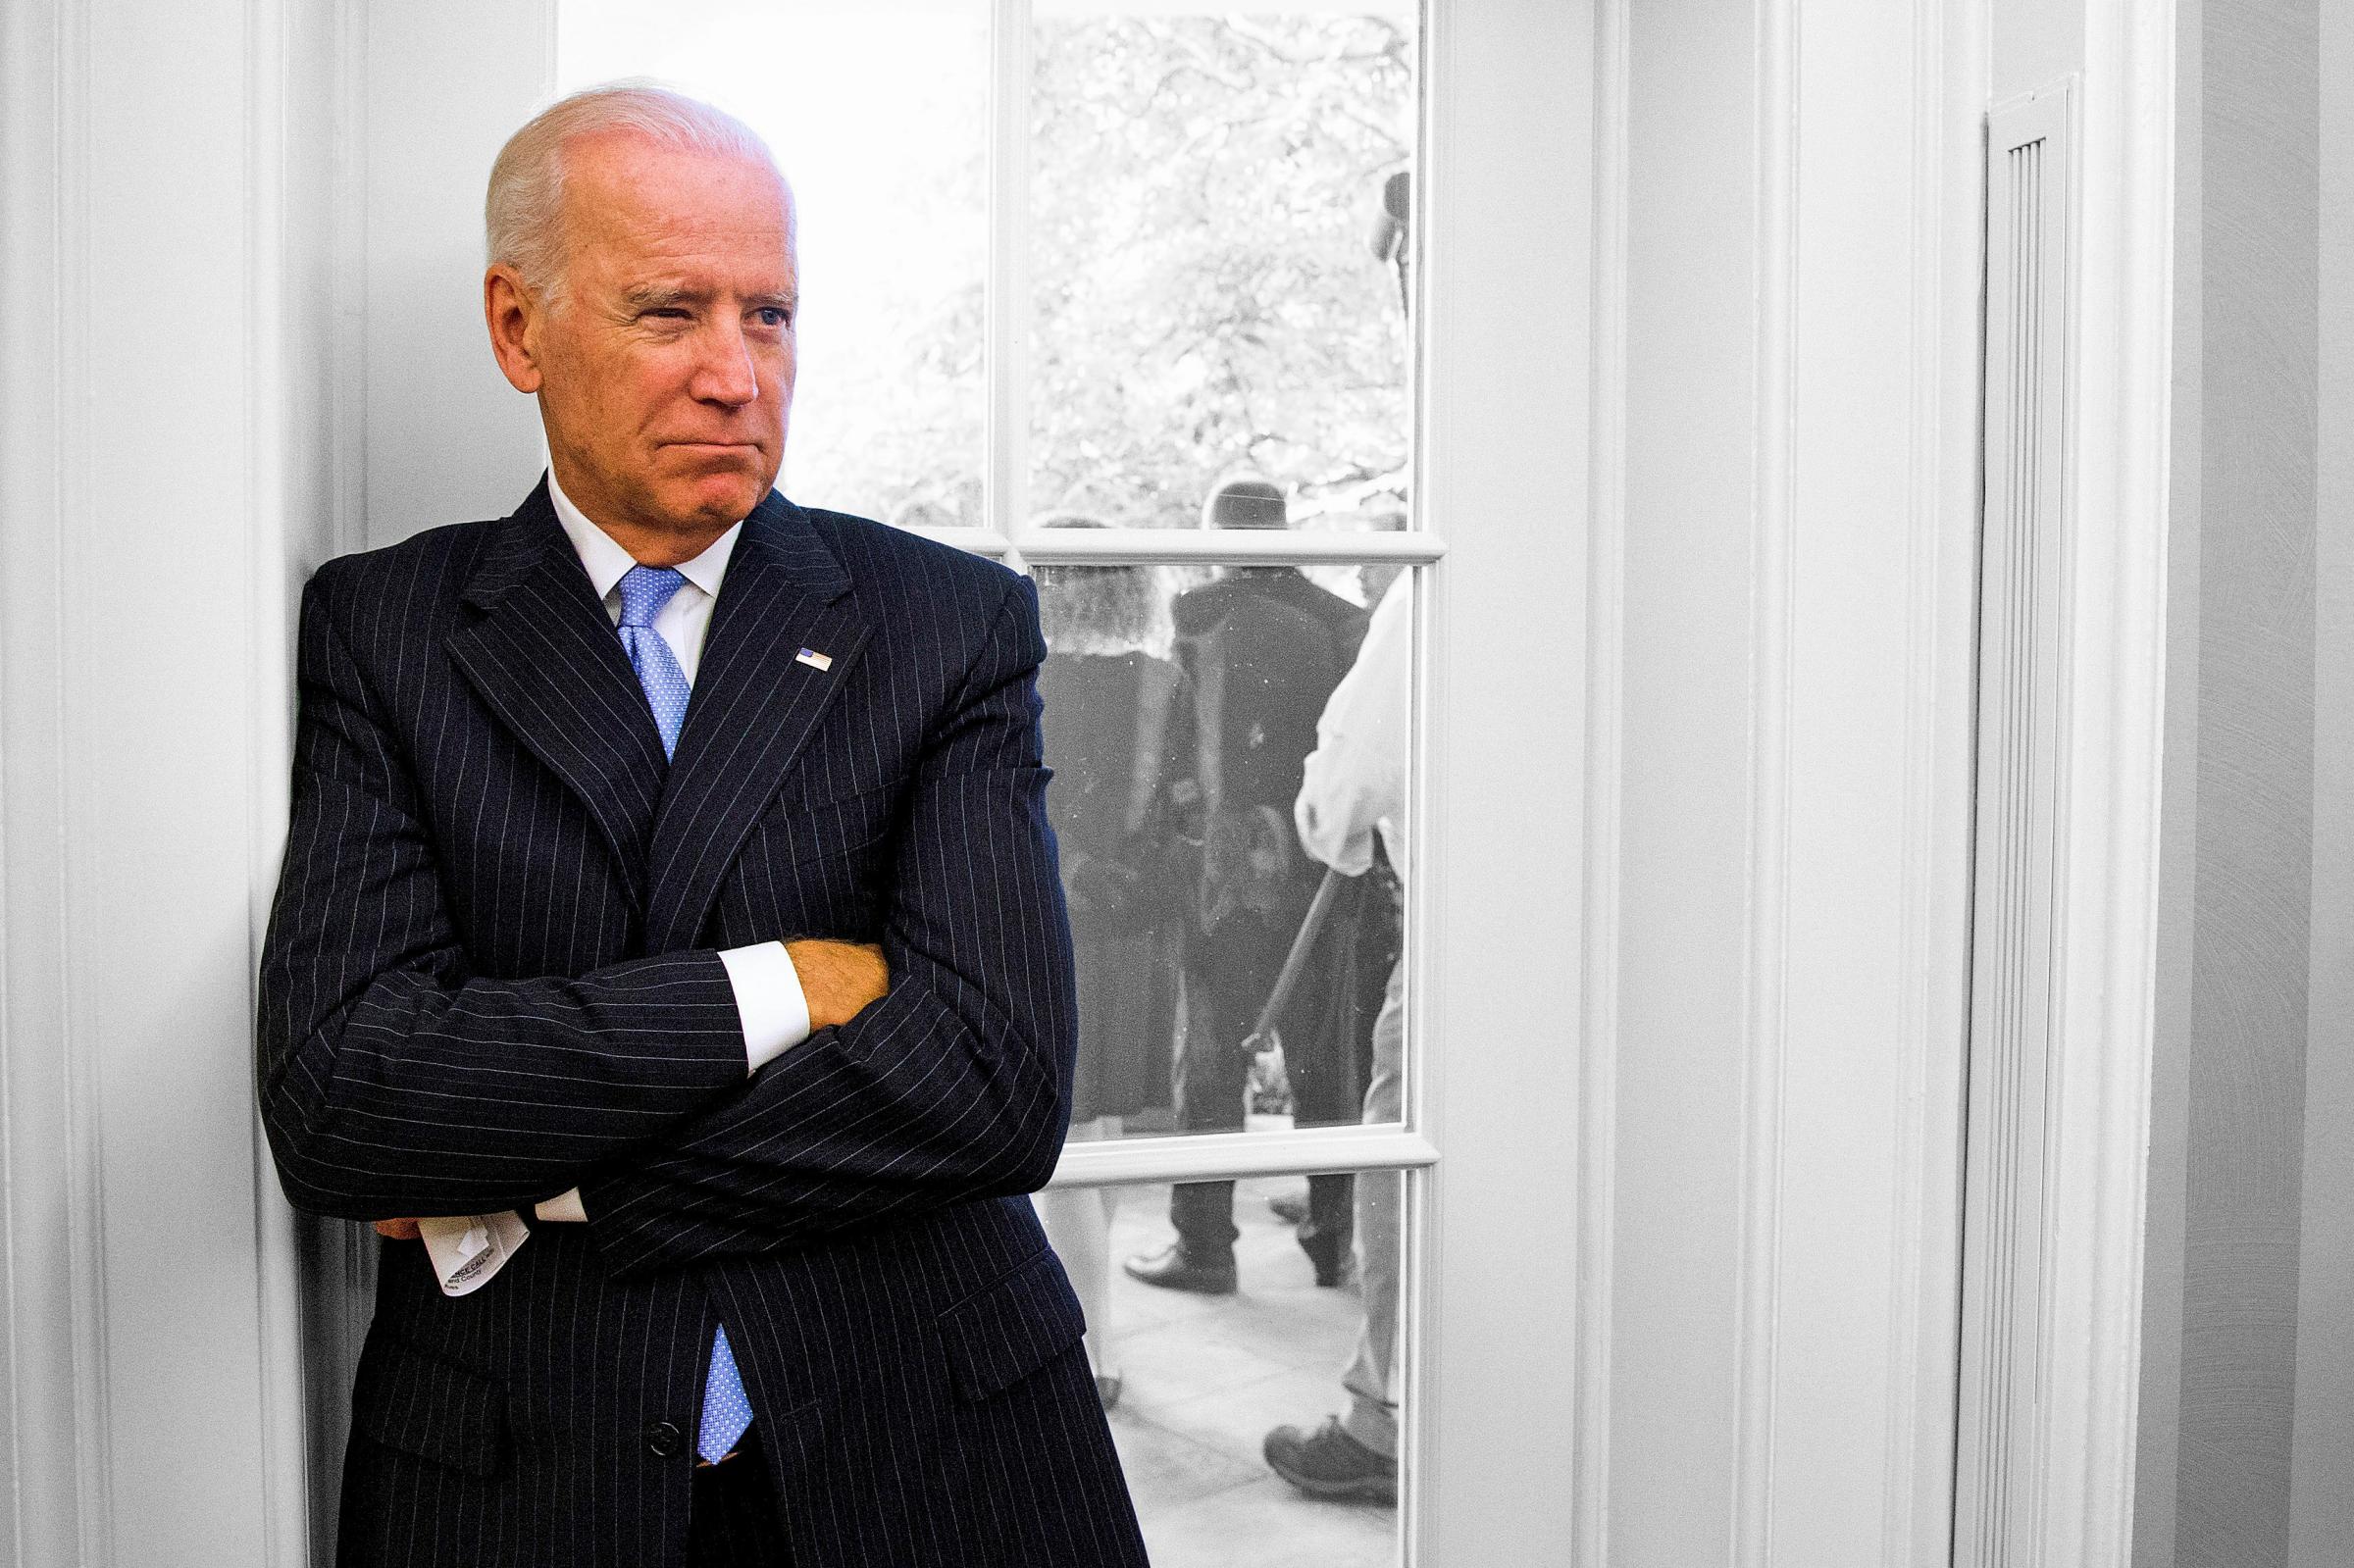 Joe Biden Attention for the Vice President dropped dramatically once he said he's not running for president. But Biden made clear he's going out with a bang. He'll be pushing for things like cancer research and hitting blue-collar areas to drum up votes for Democratic candidates.